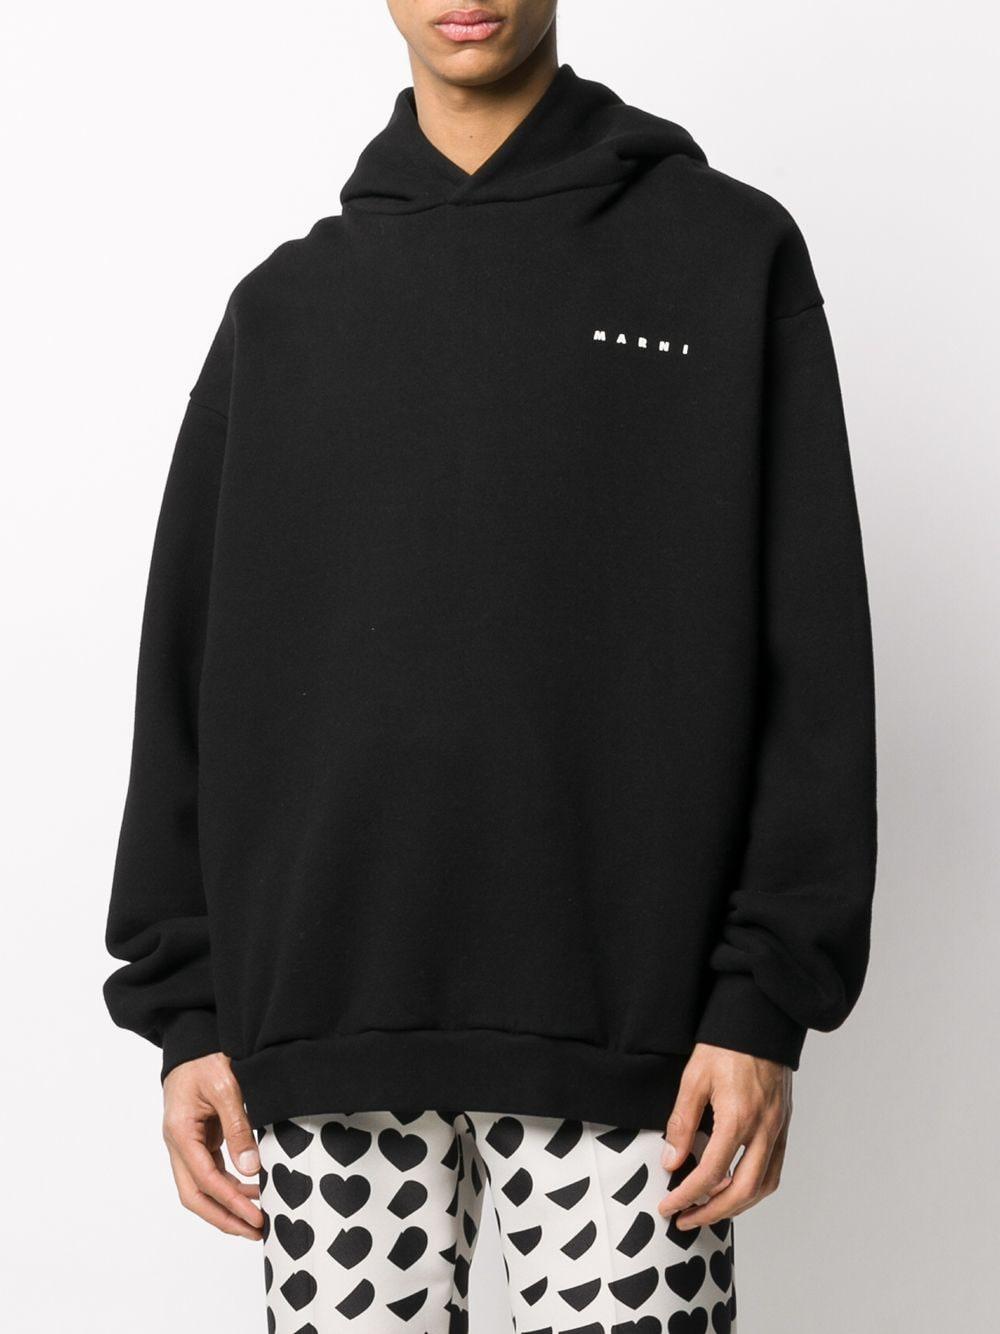 Marni Cotton Oversized Graphic Print Hoodie in Black for Men - Lyst